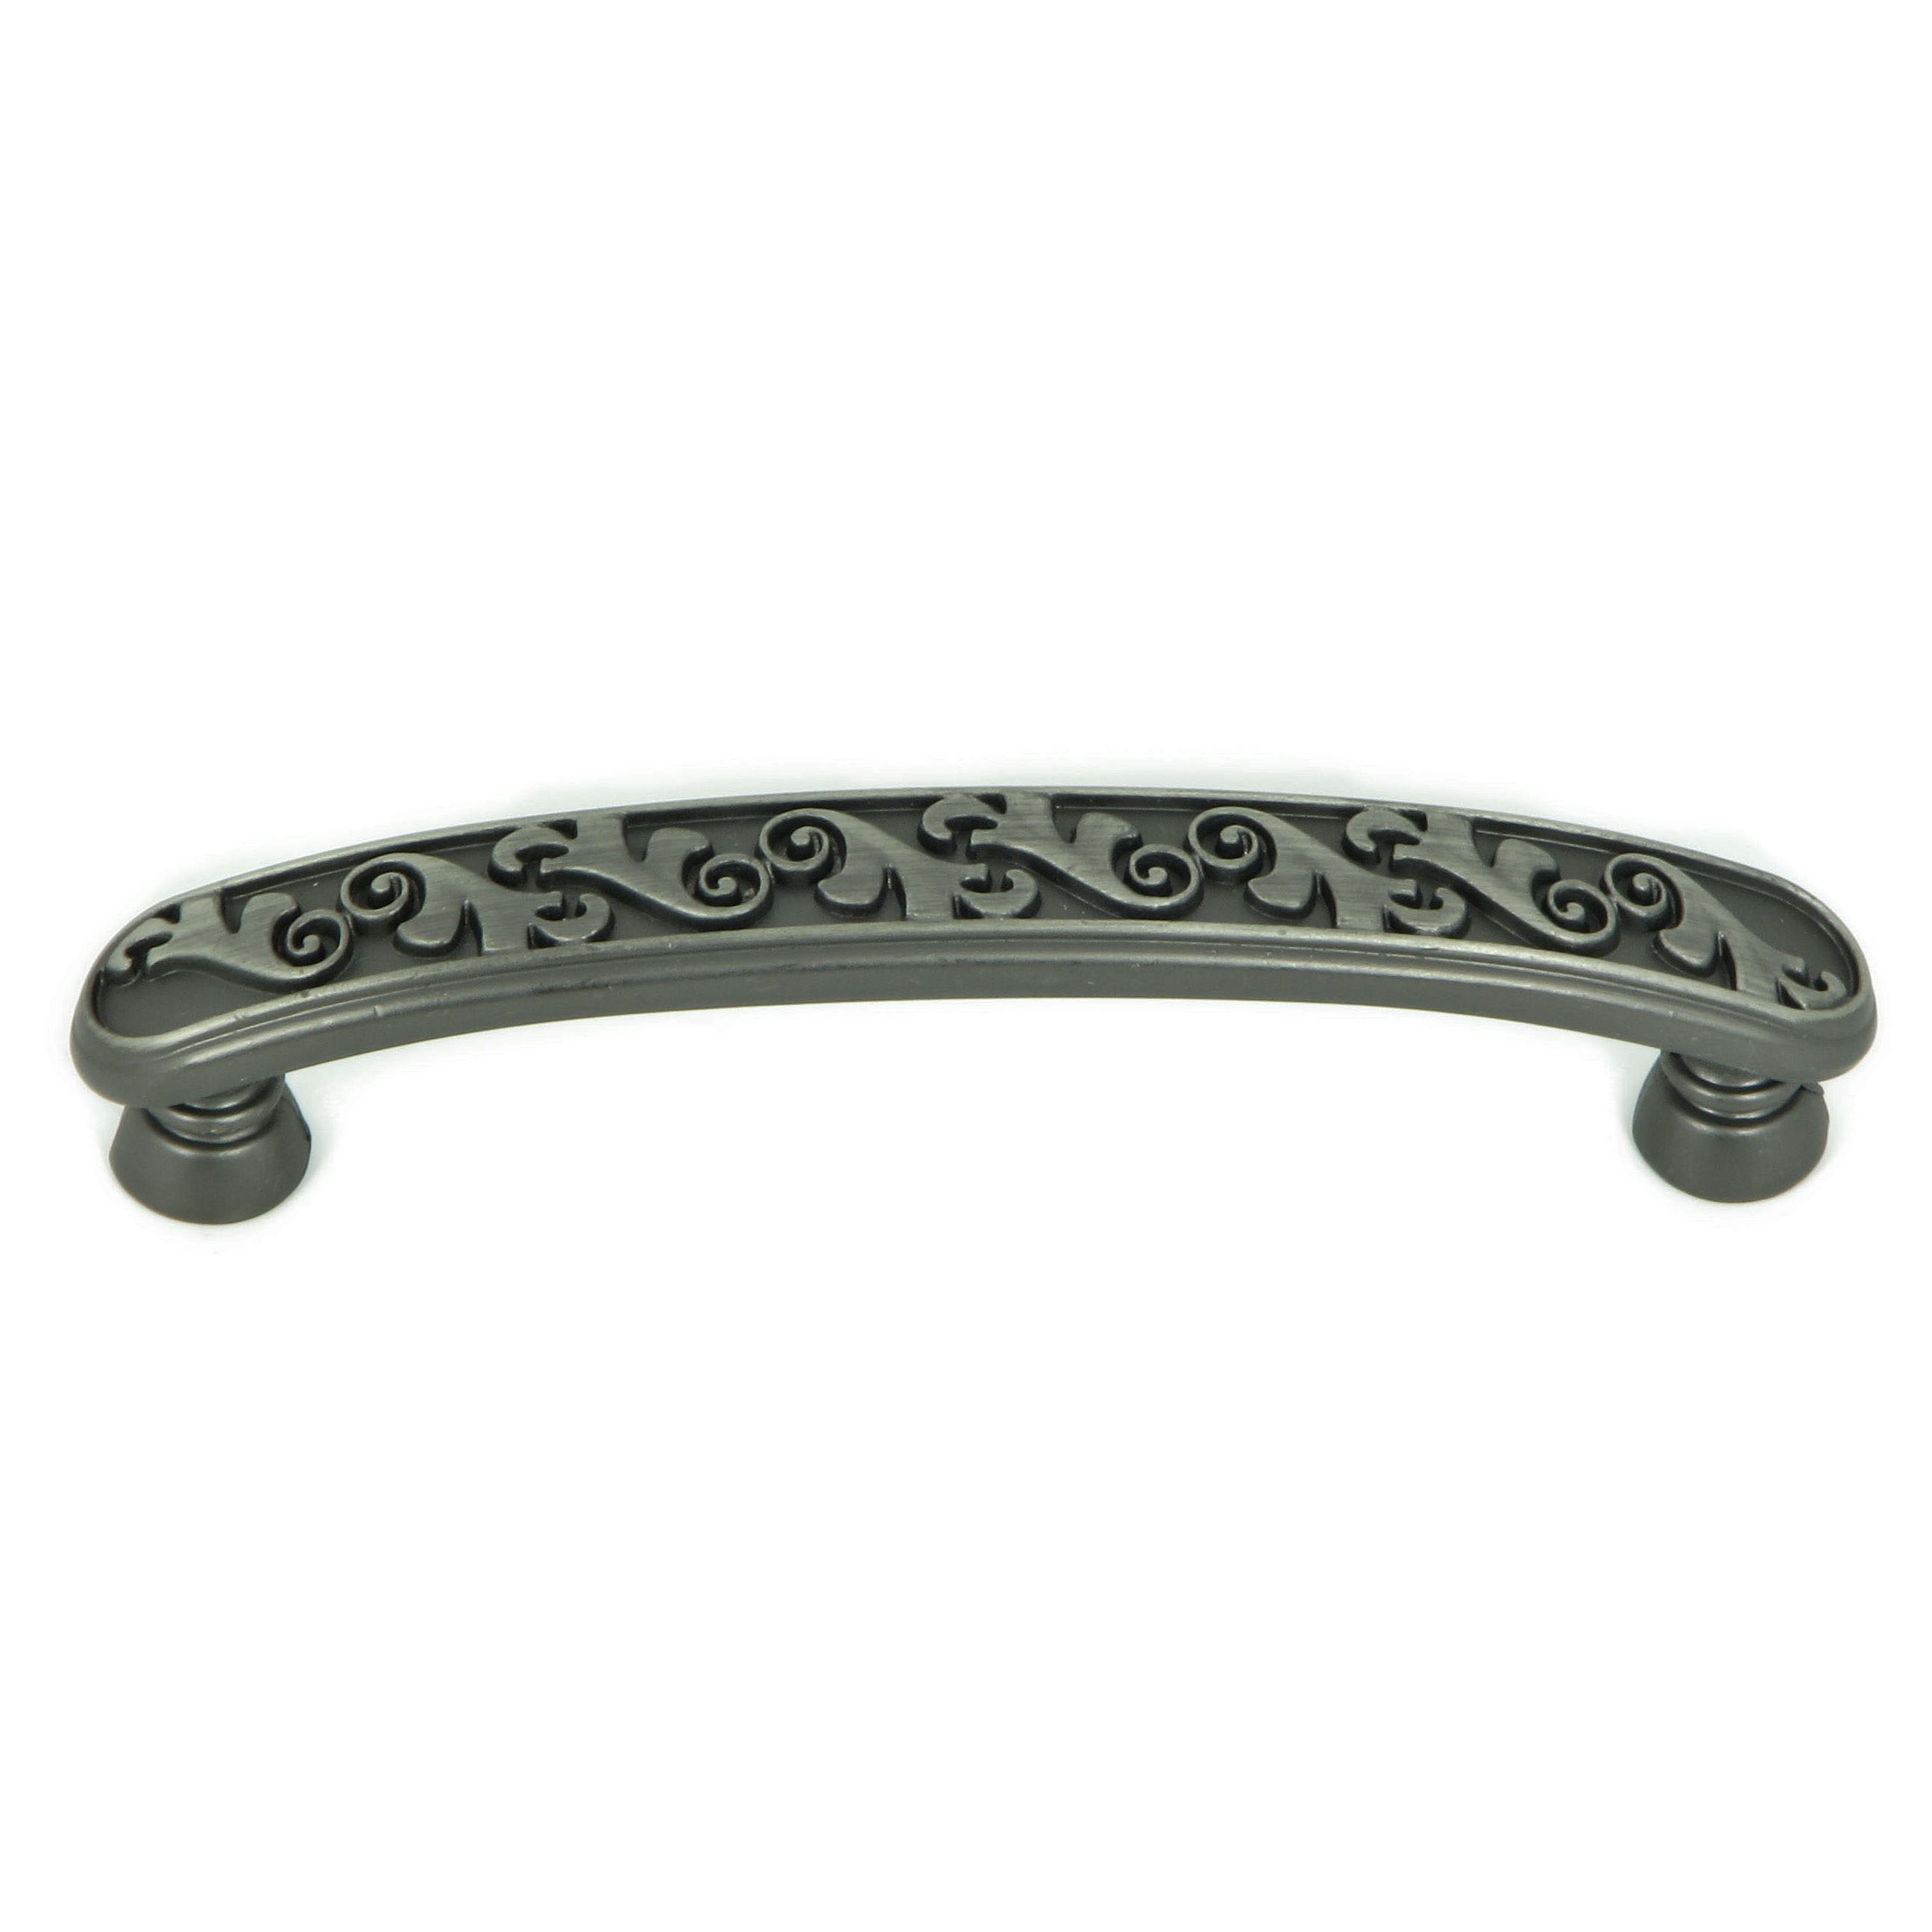 Oakley Cabinet Pull in Weathered Nickel 1 pc